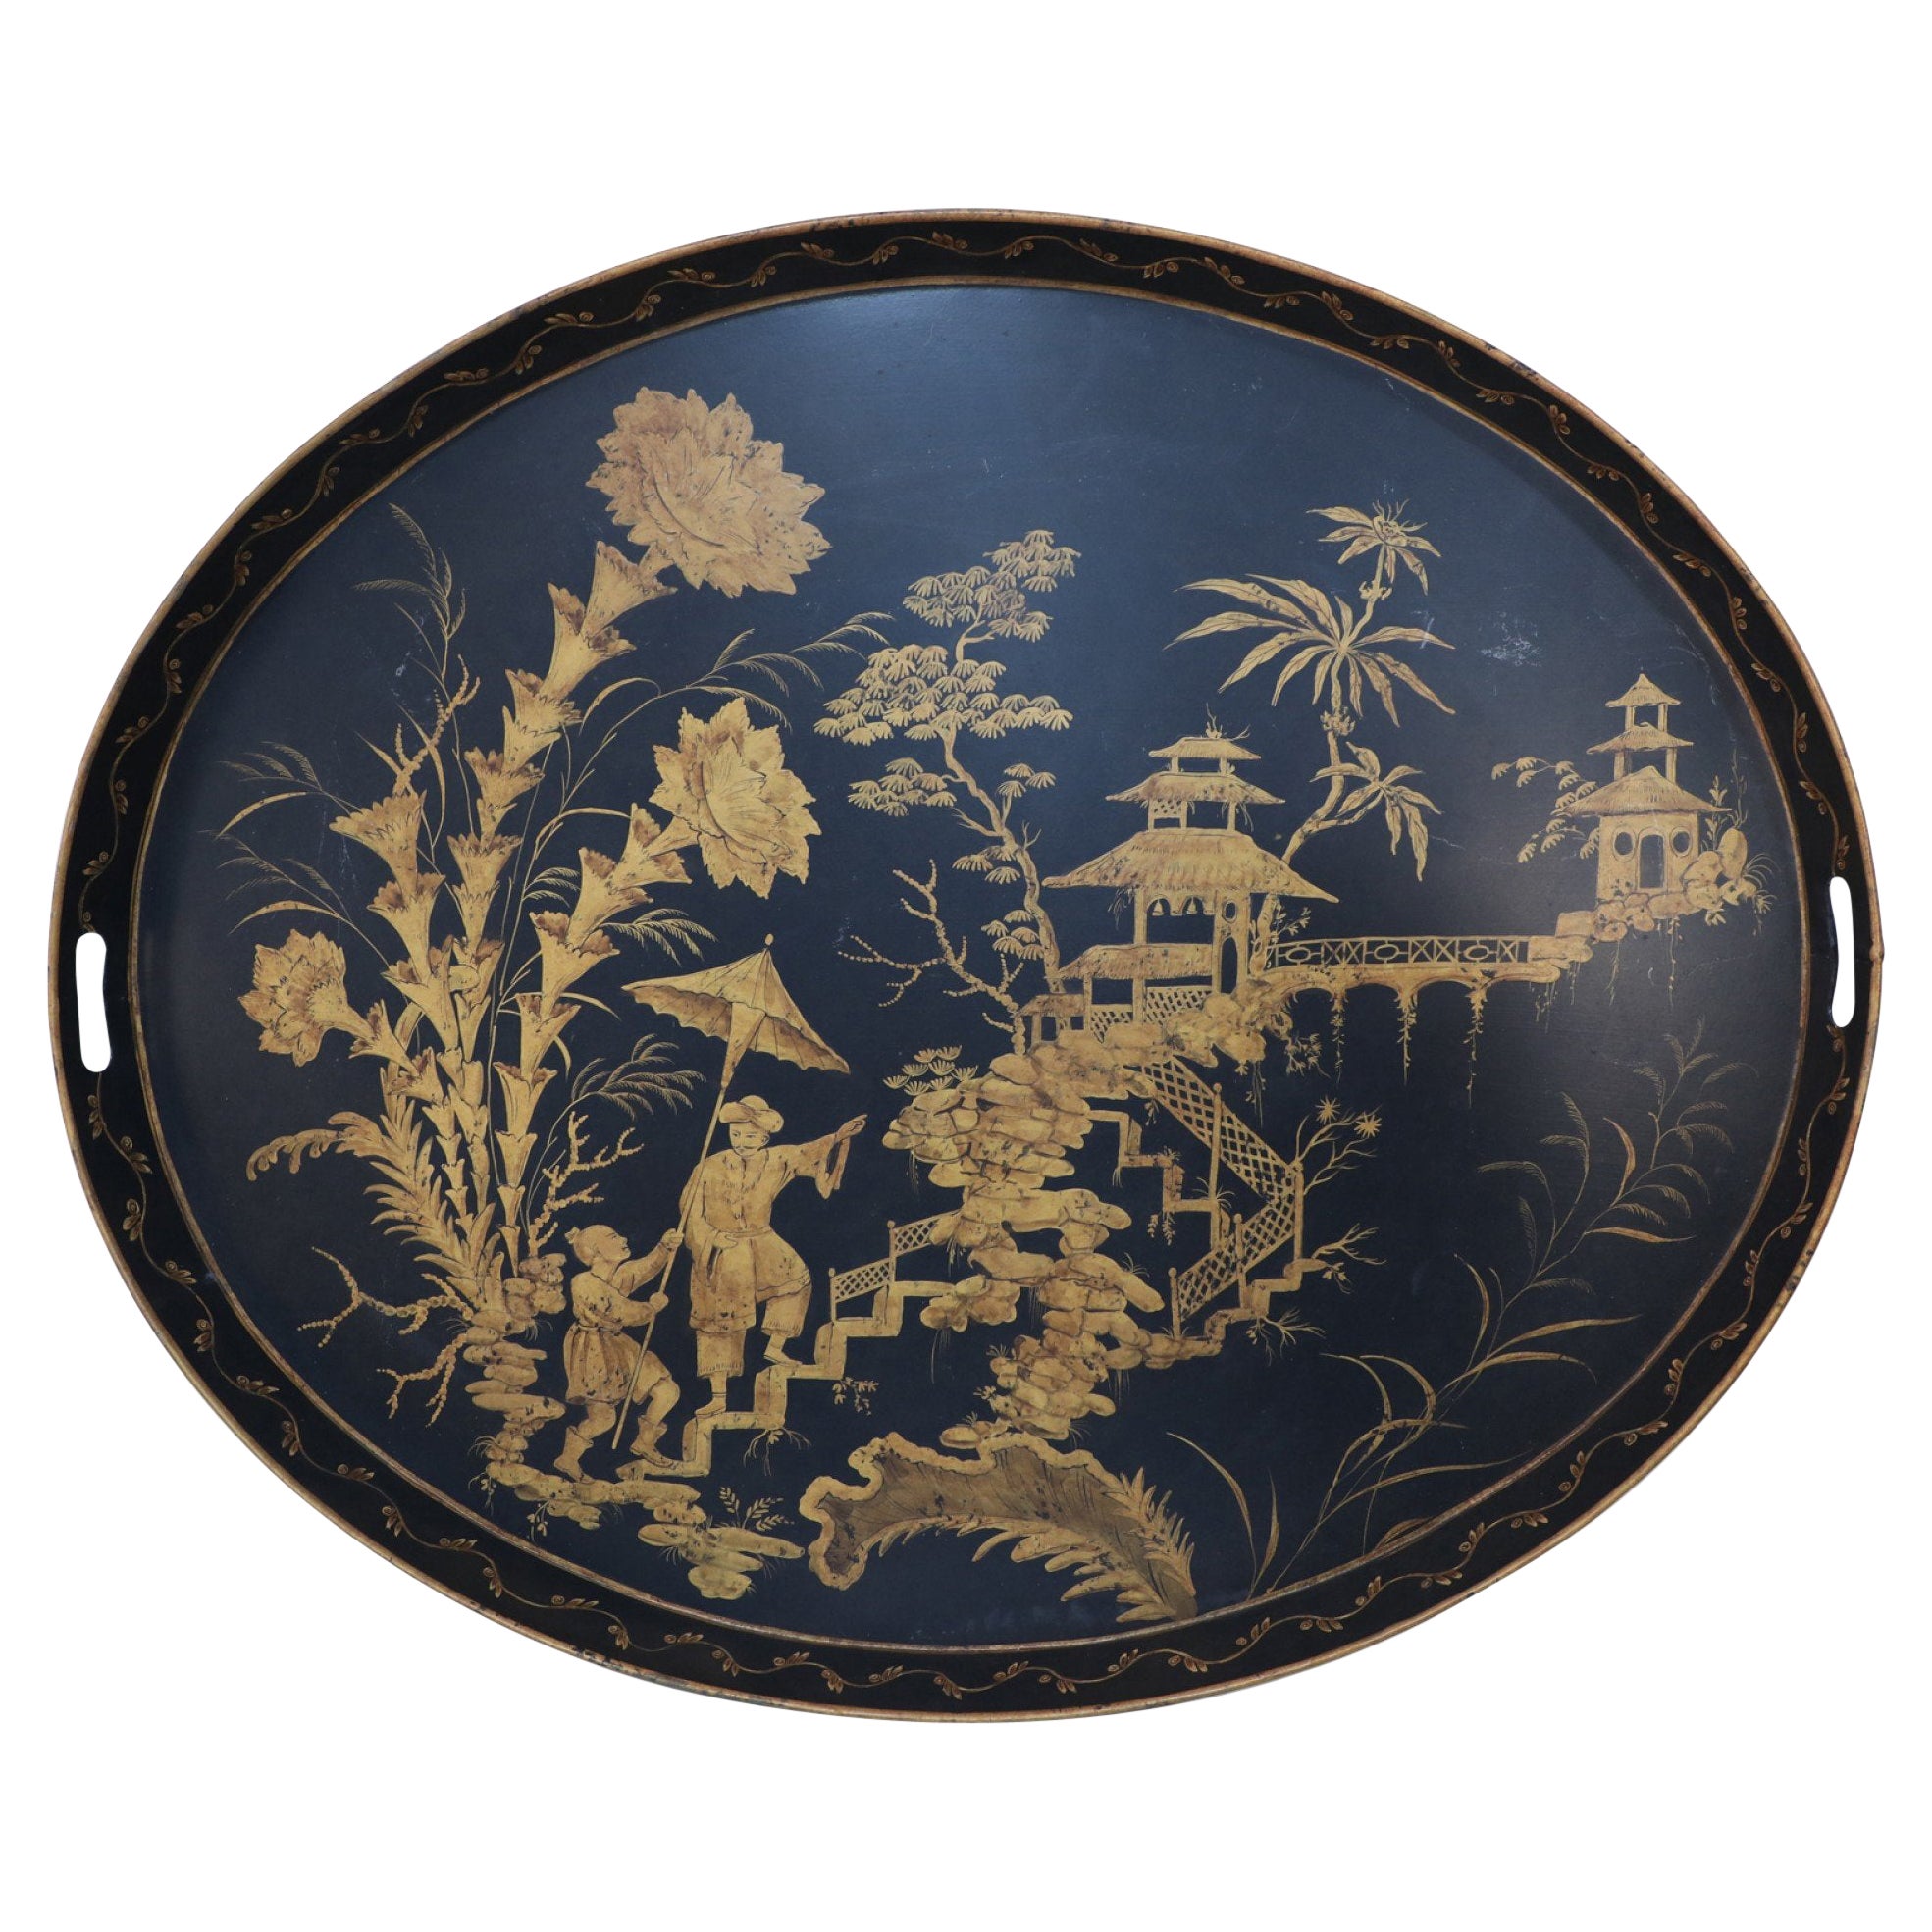 Vintage Chinese Oval Black and Gold Tole Floral Walkway Design Tray